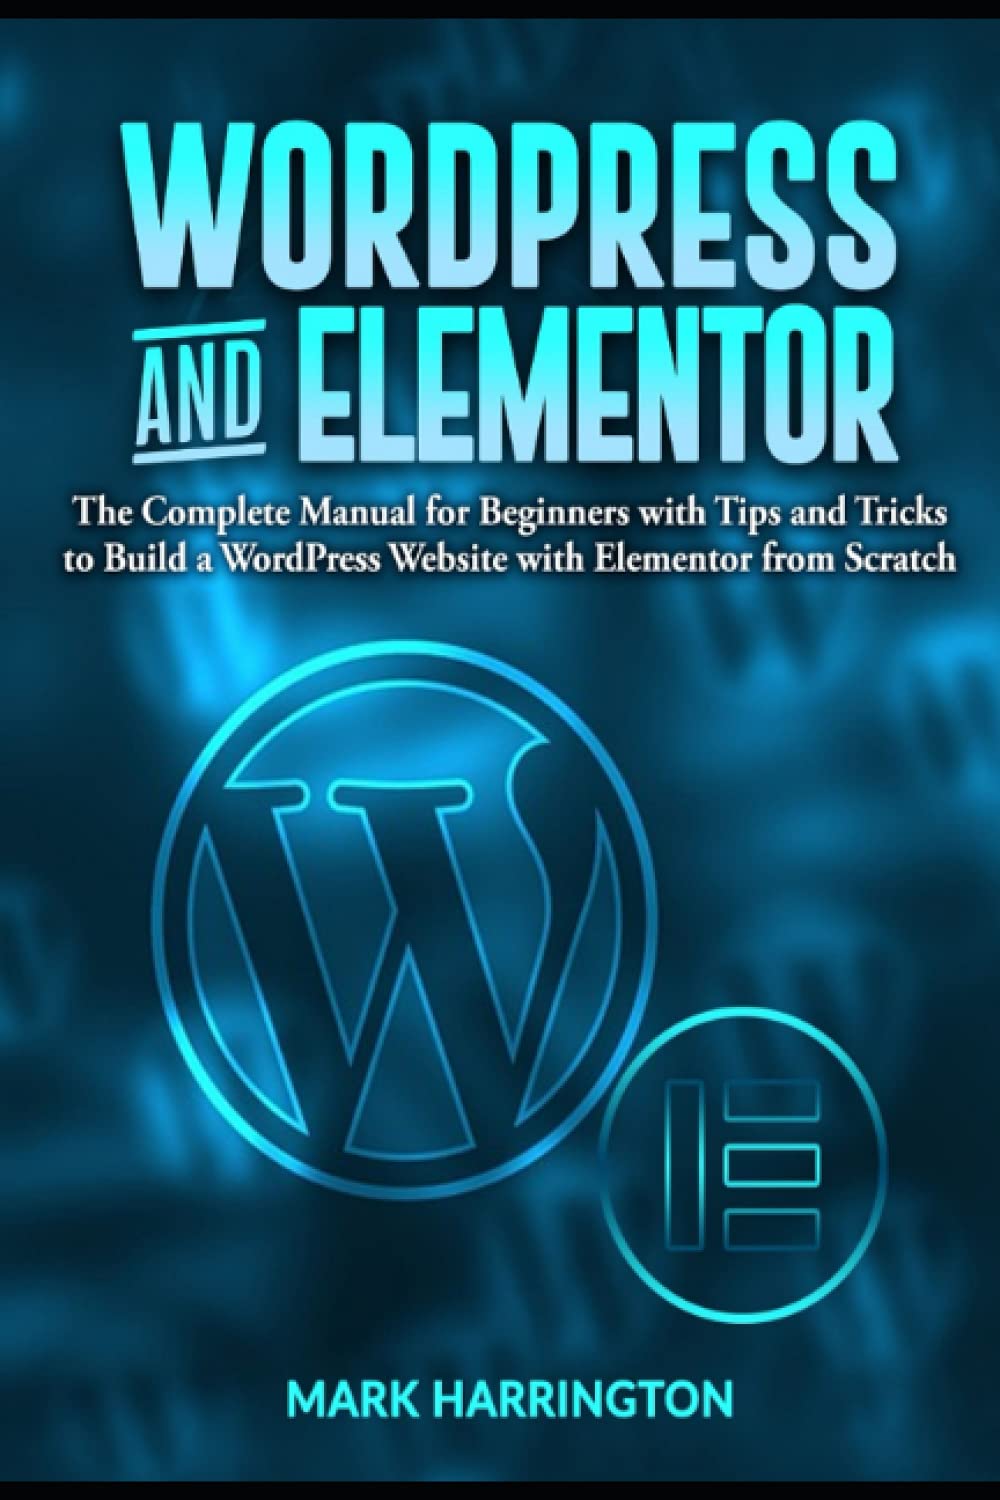 WordPress and Elementor: The Complete Manual